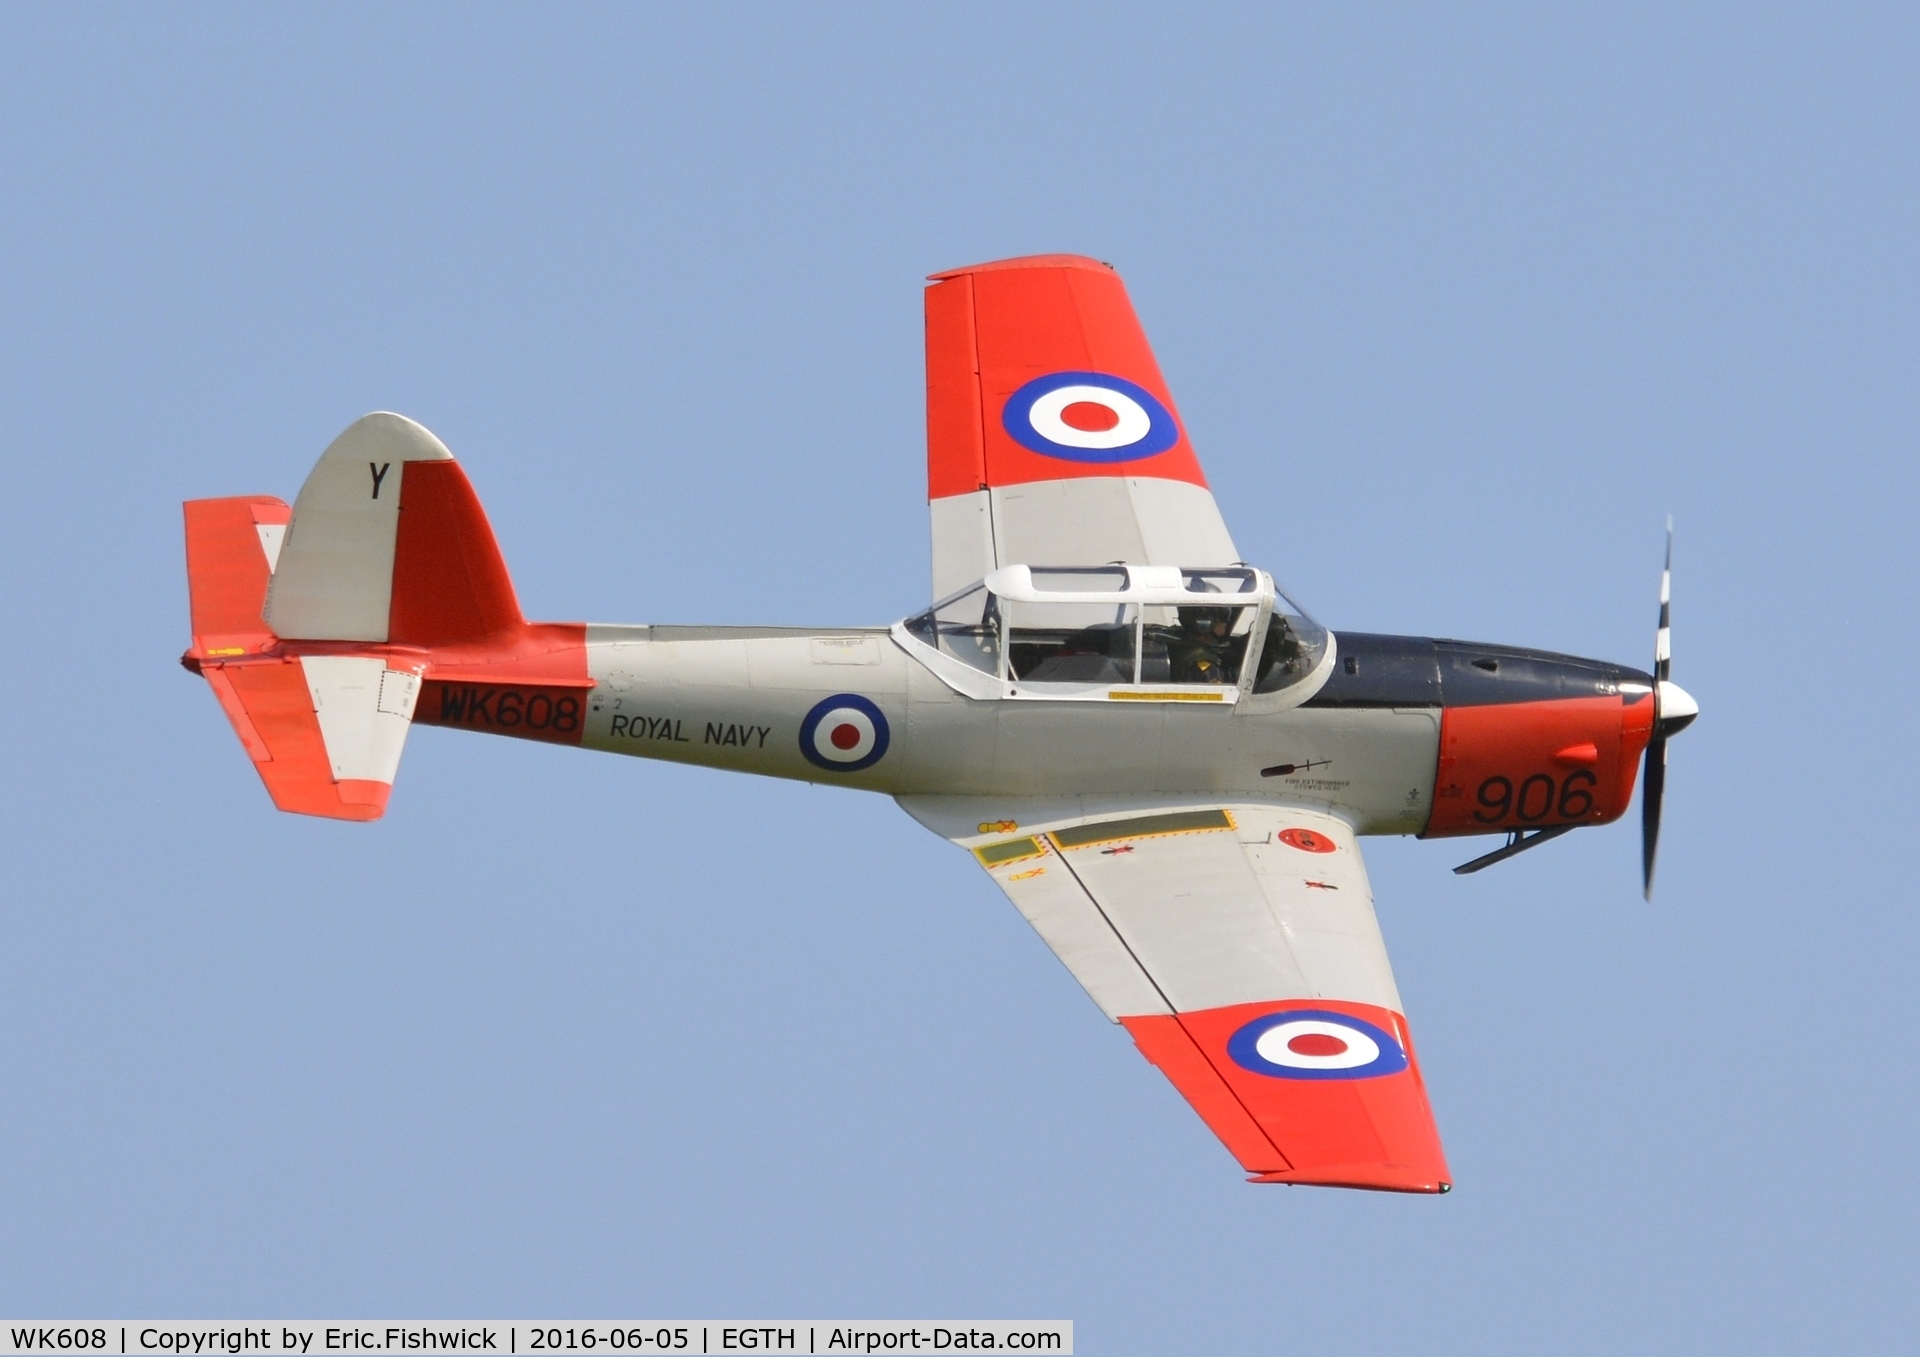 WK608, 1952 De Havilland DHC-1 Chipmunk T.10 C/N C1/0617, 42. WK608 in display mode at Shuttleworth Collection's 'Fly Navy,' June 2016.